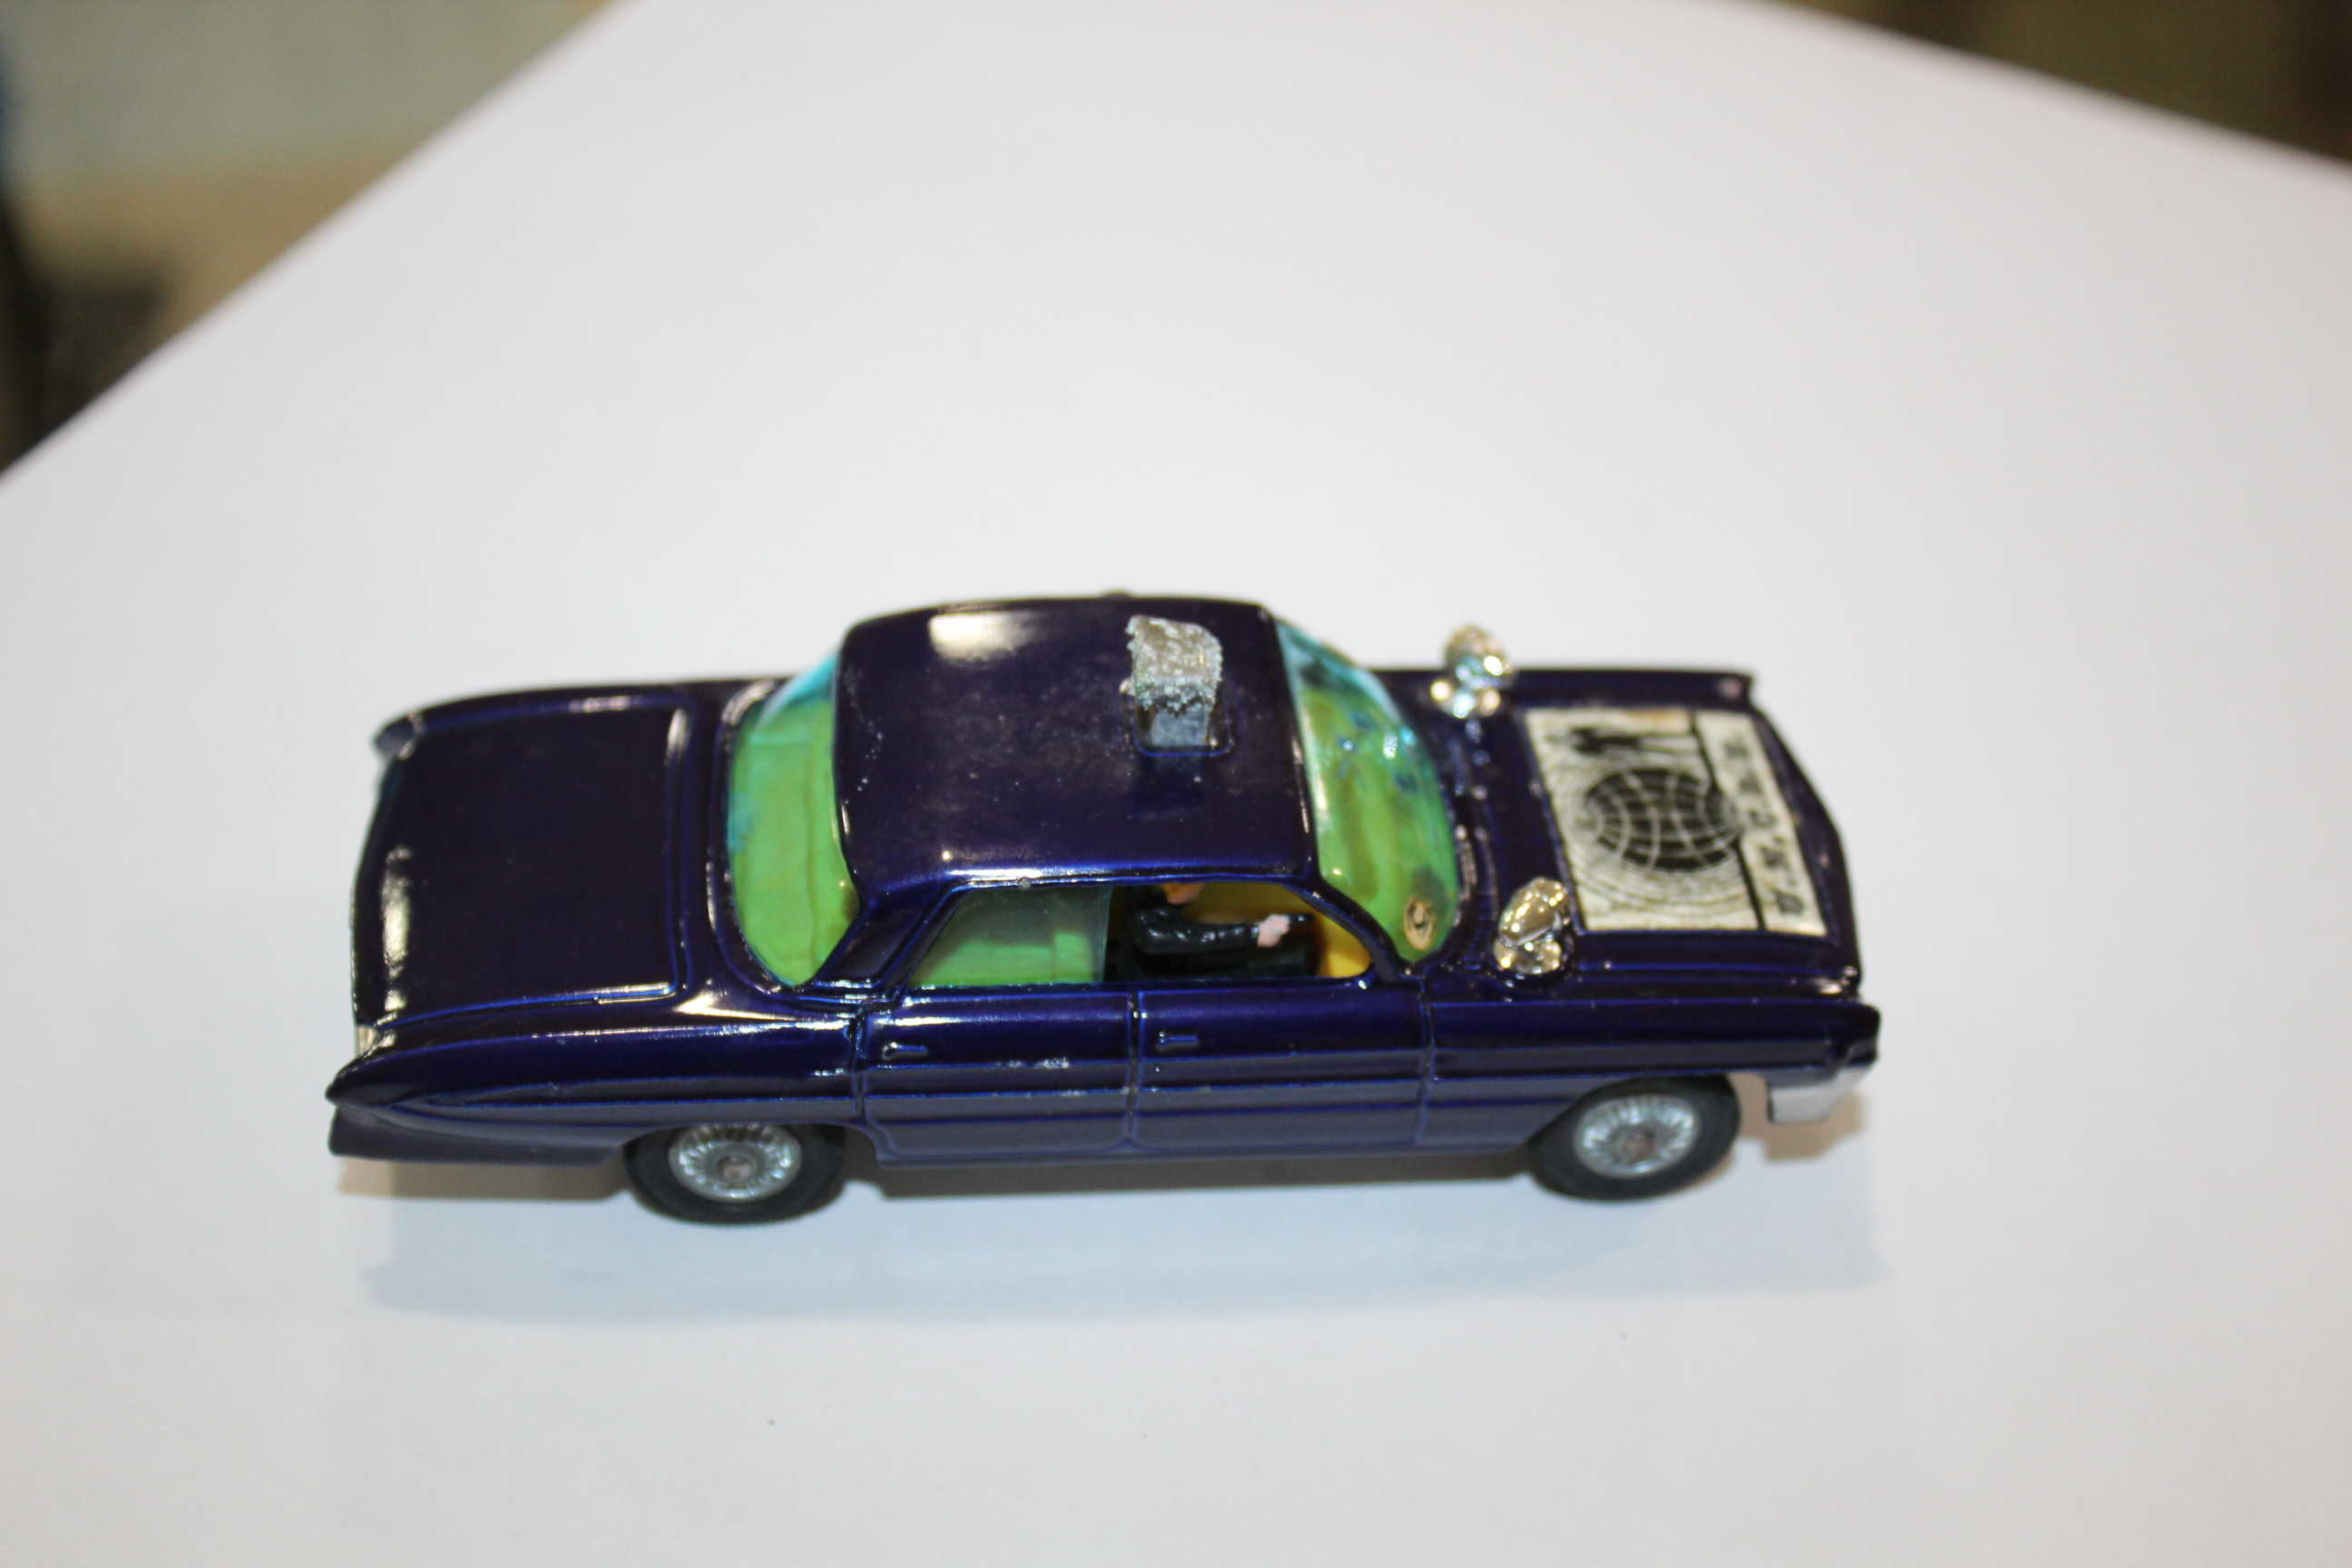 CORGI MAN FROM UNCLE THRUSH BUSTER Model No 497, the car with a purple body and 2 figures, and - Image 10 of 12